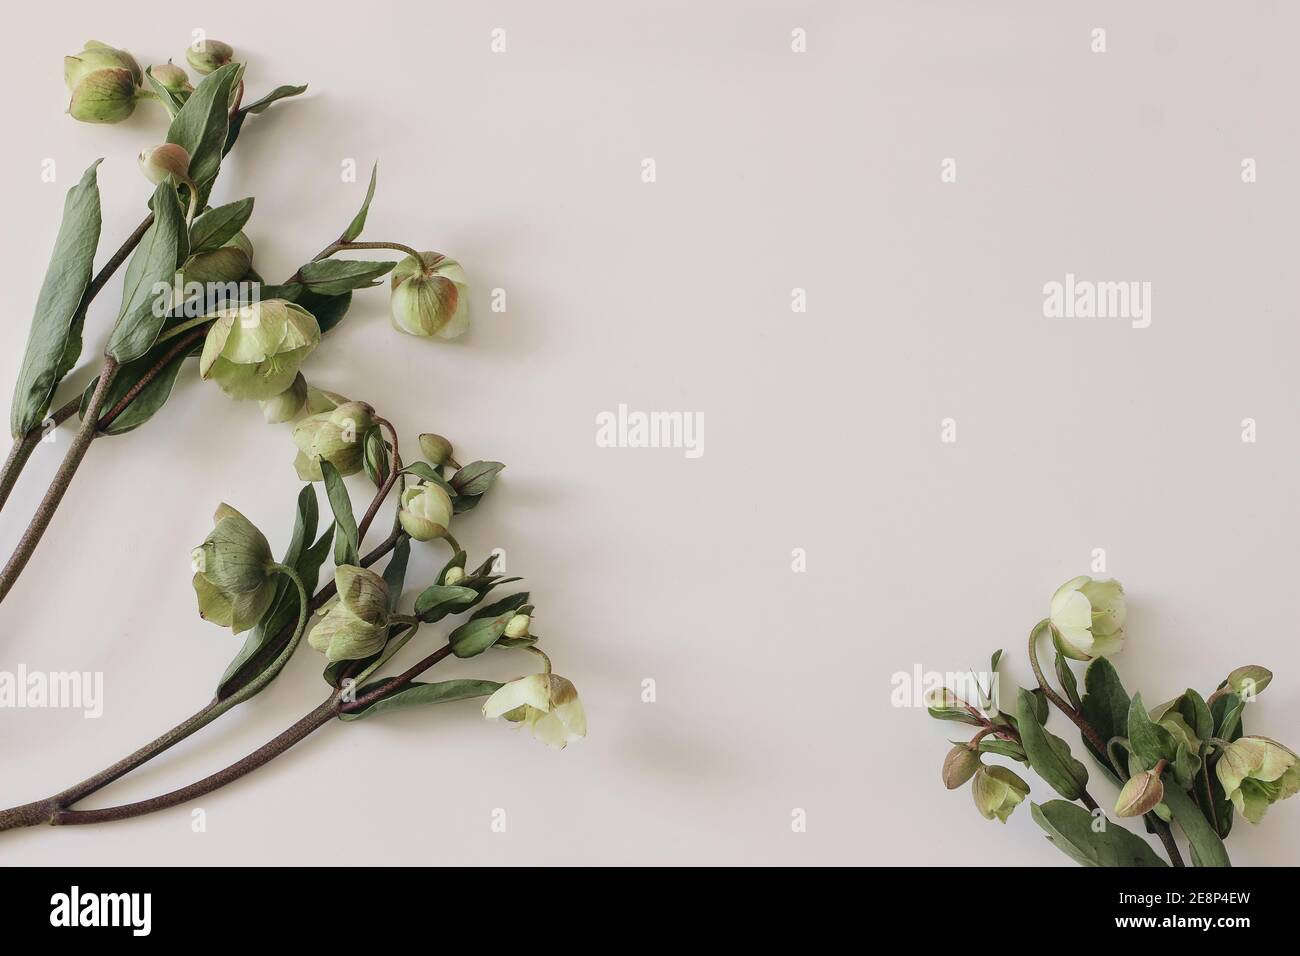 Spring floral frame, banner. Green hellebores flowers on neutral beige champagne table background. Empty copy space. Flat lay, top view. Natural Stock Photo